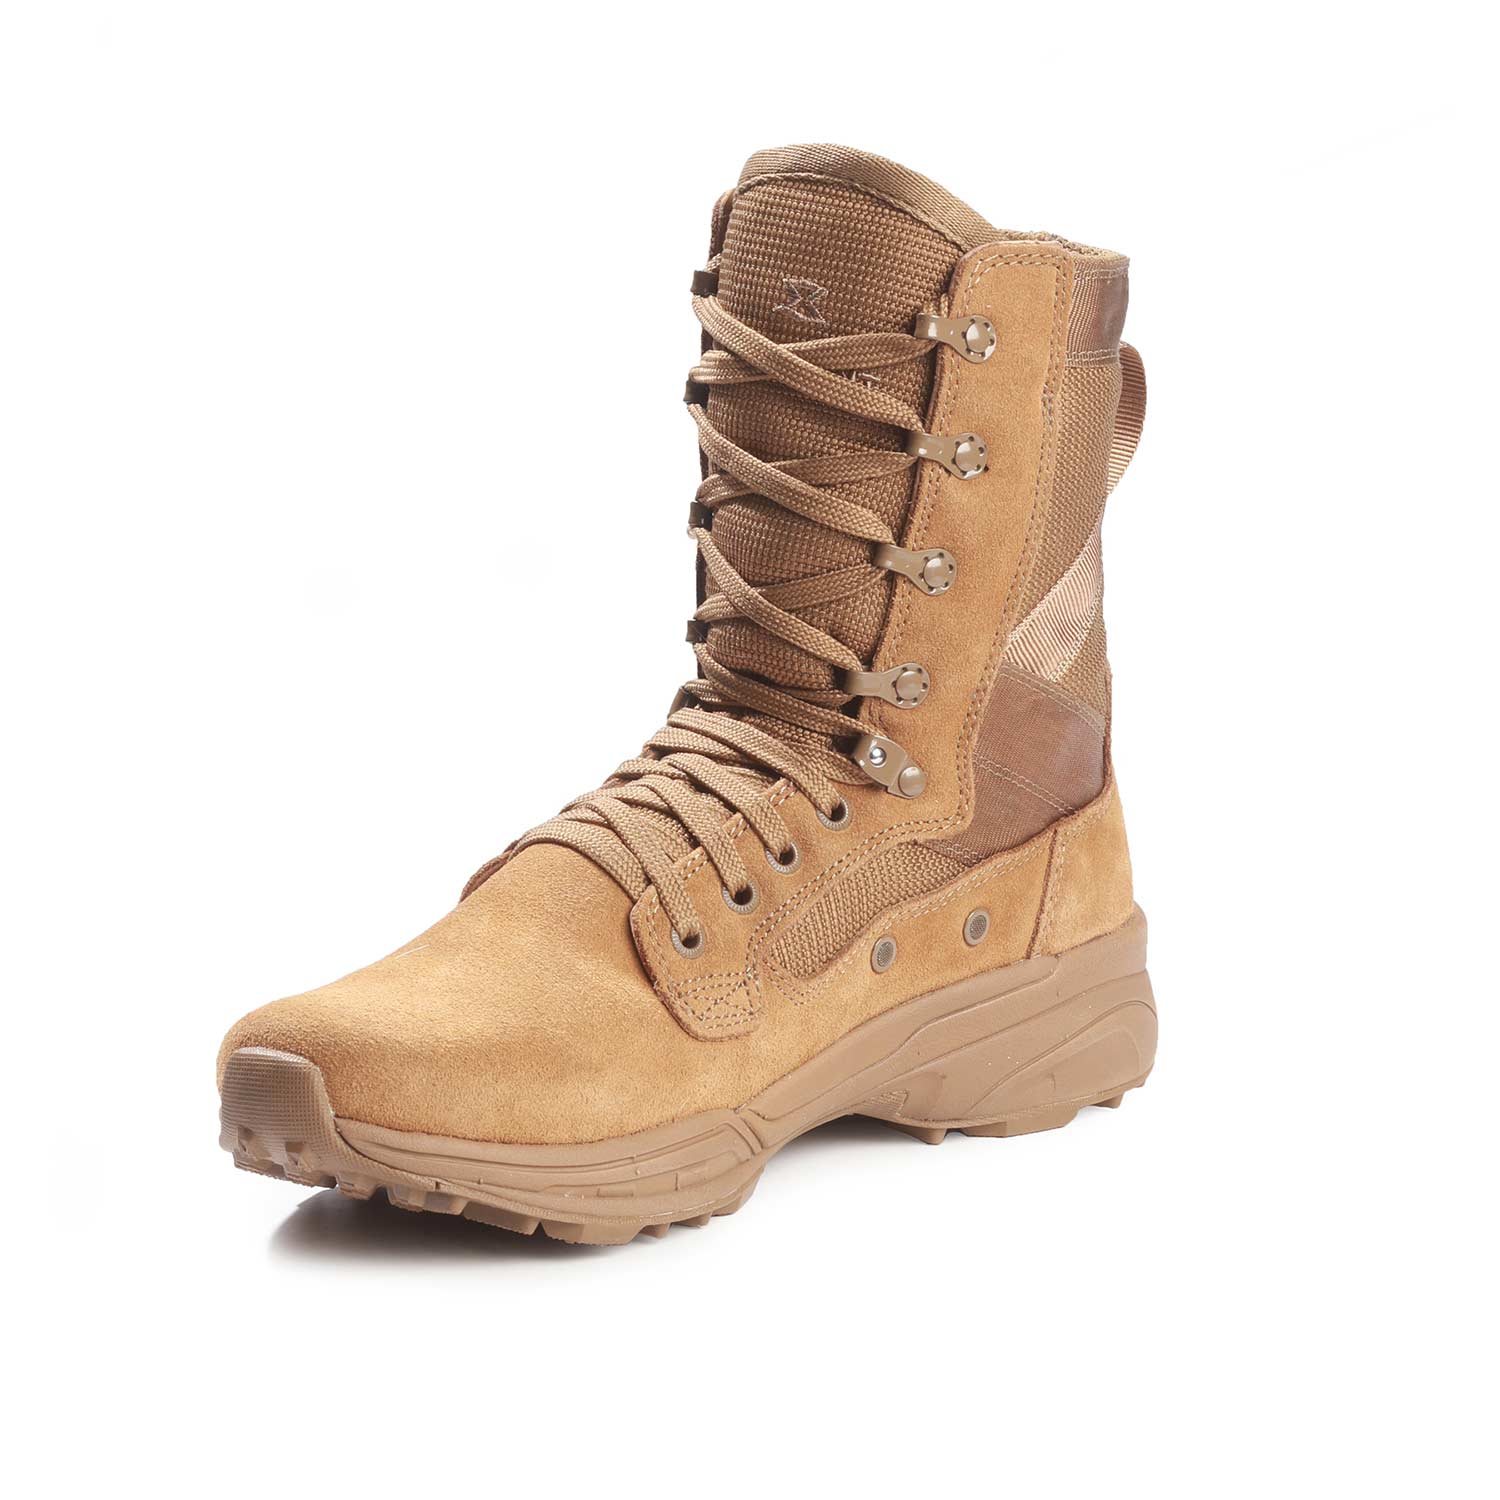 Garmont T8 NFS Boot (OCP Coyote)